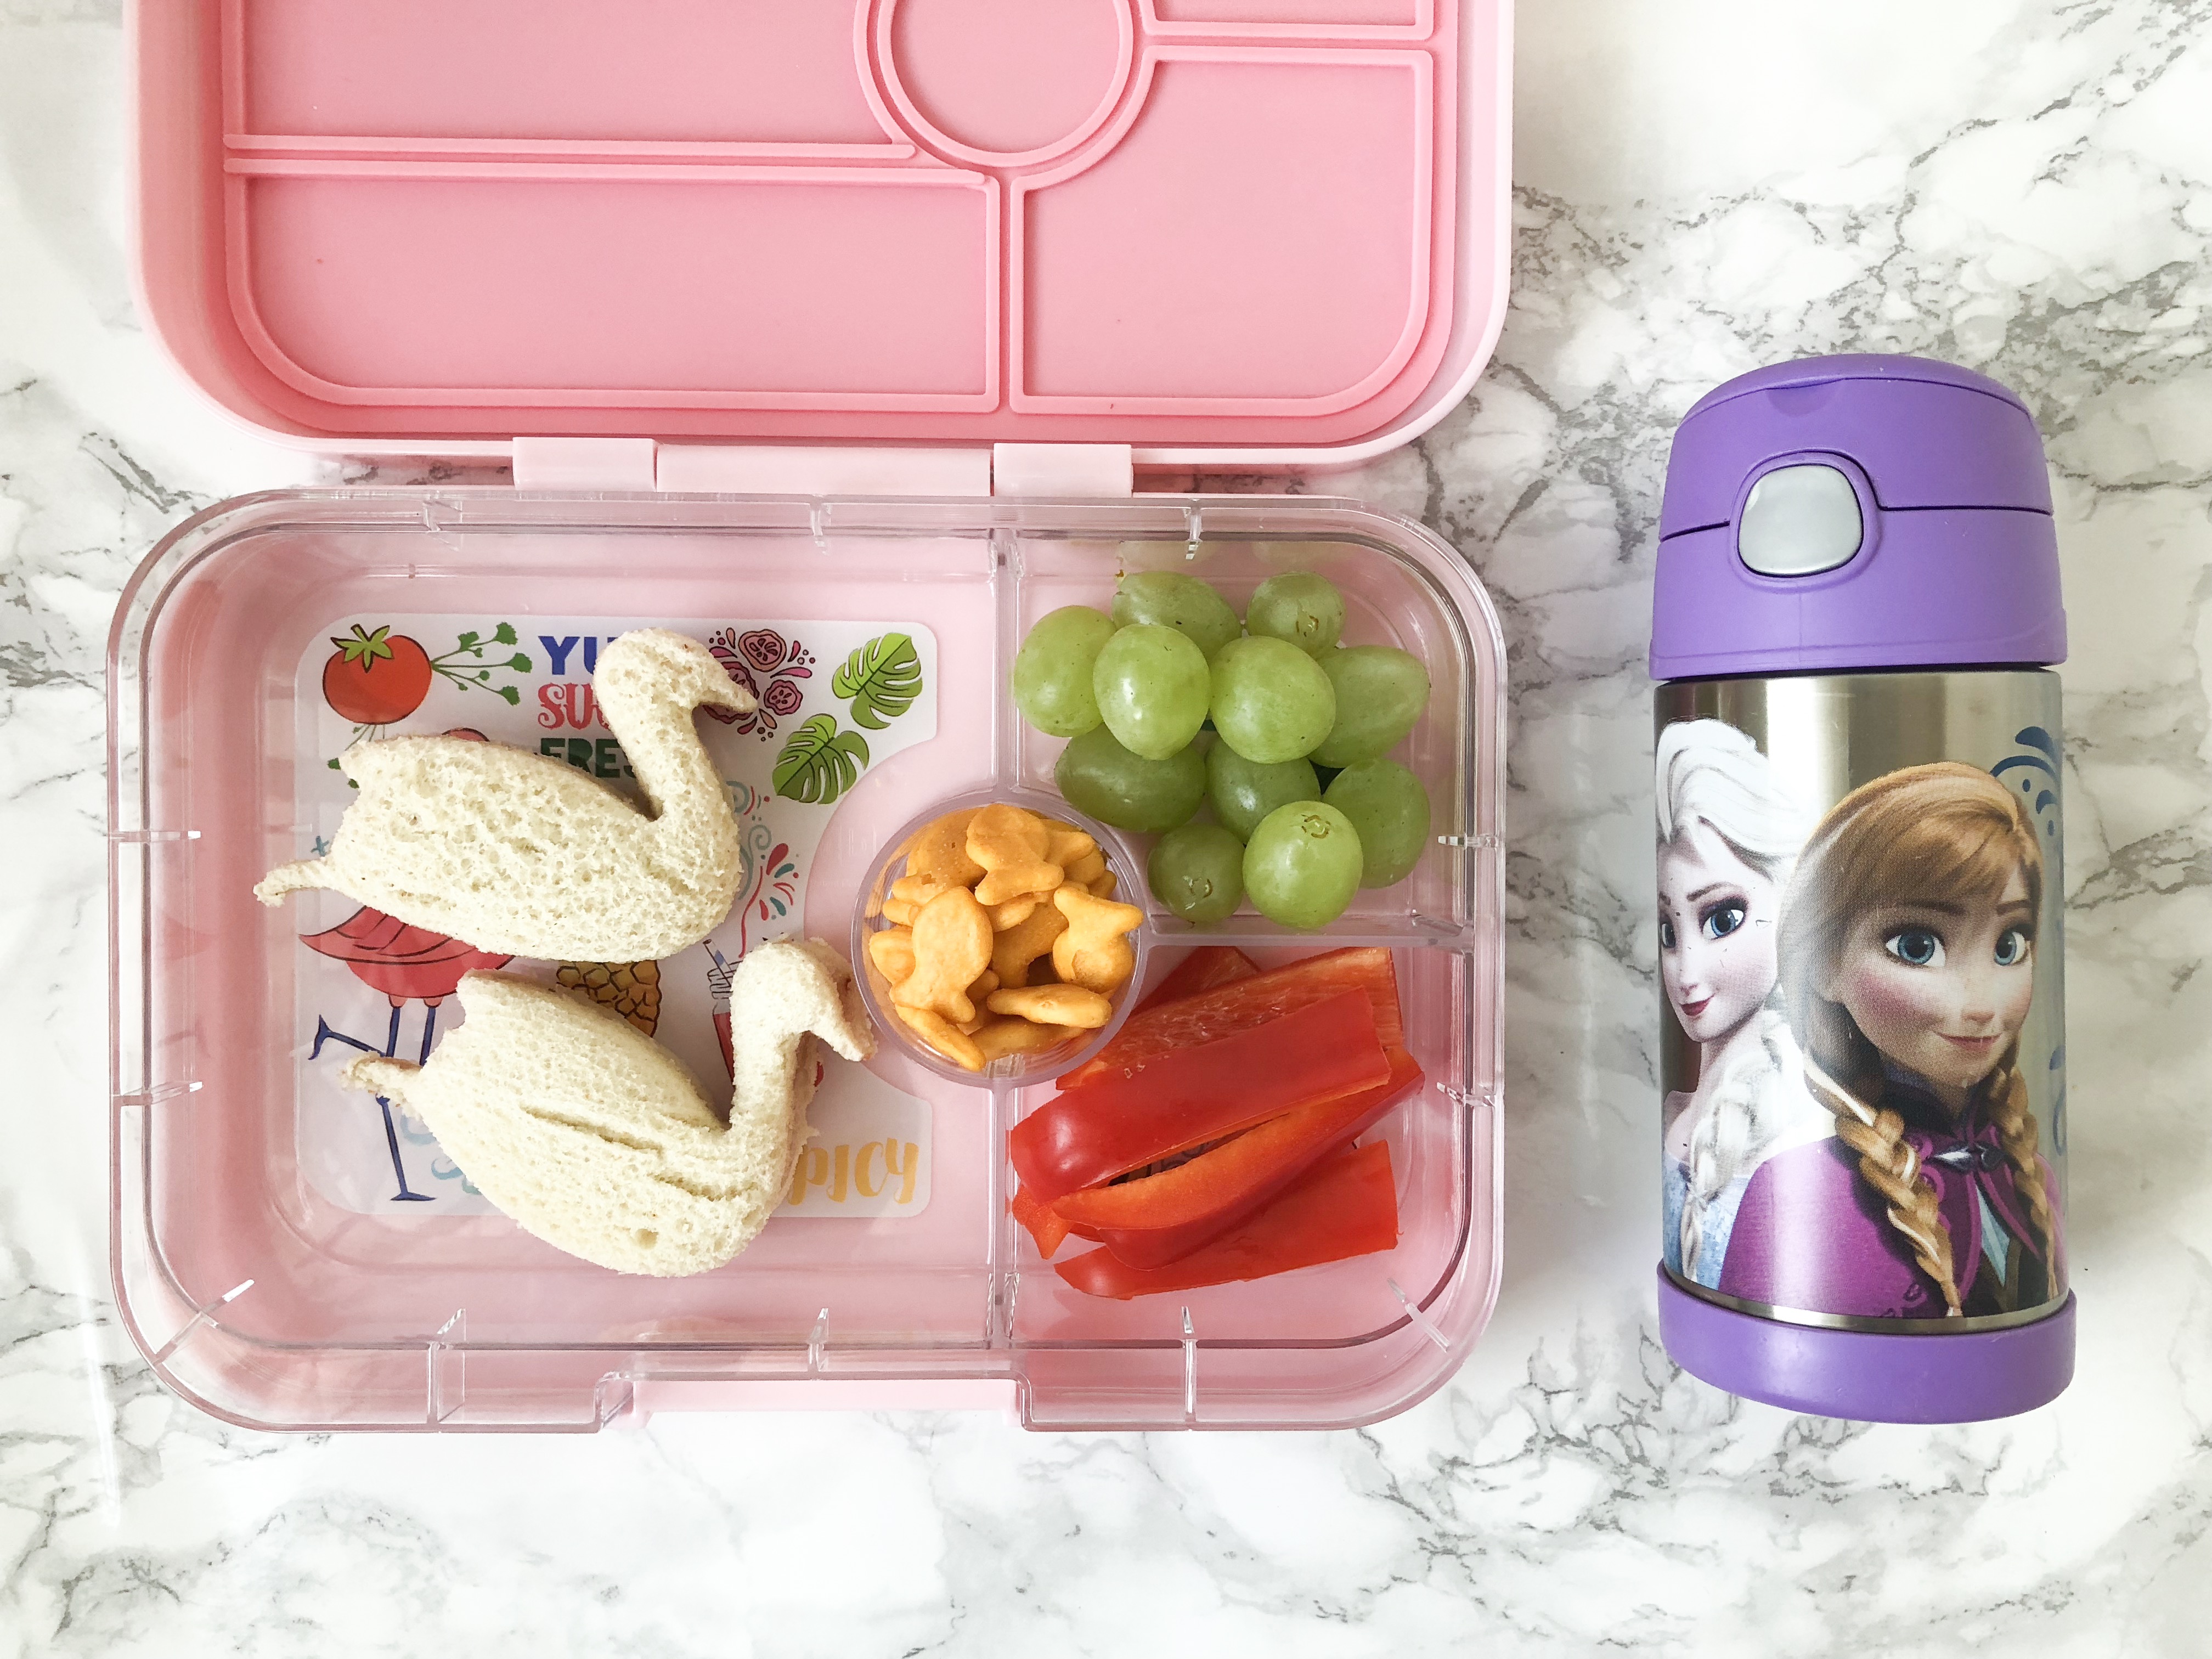 Back to school lunches on livin' life with style